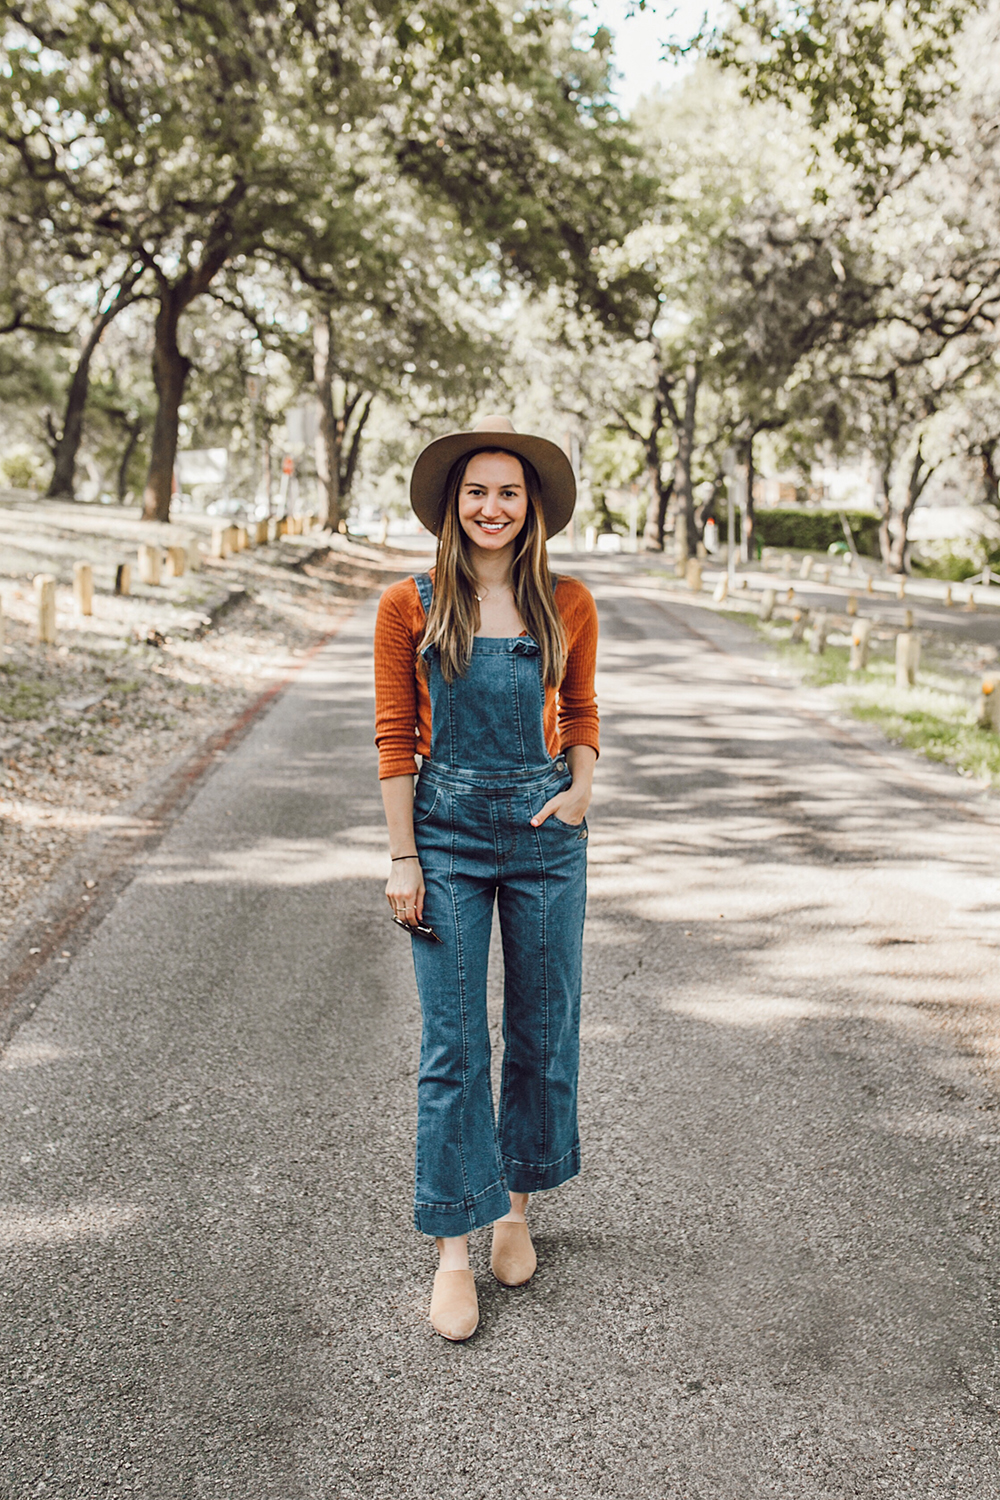 Must Have Overalls Livvyland Austin Fashion And Style Blogger